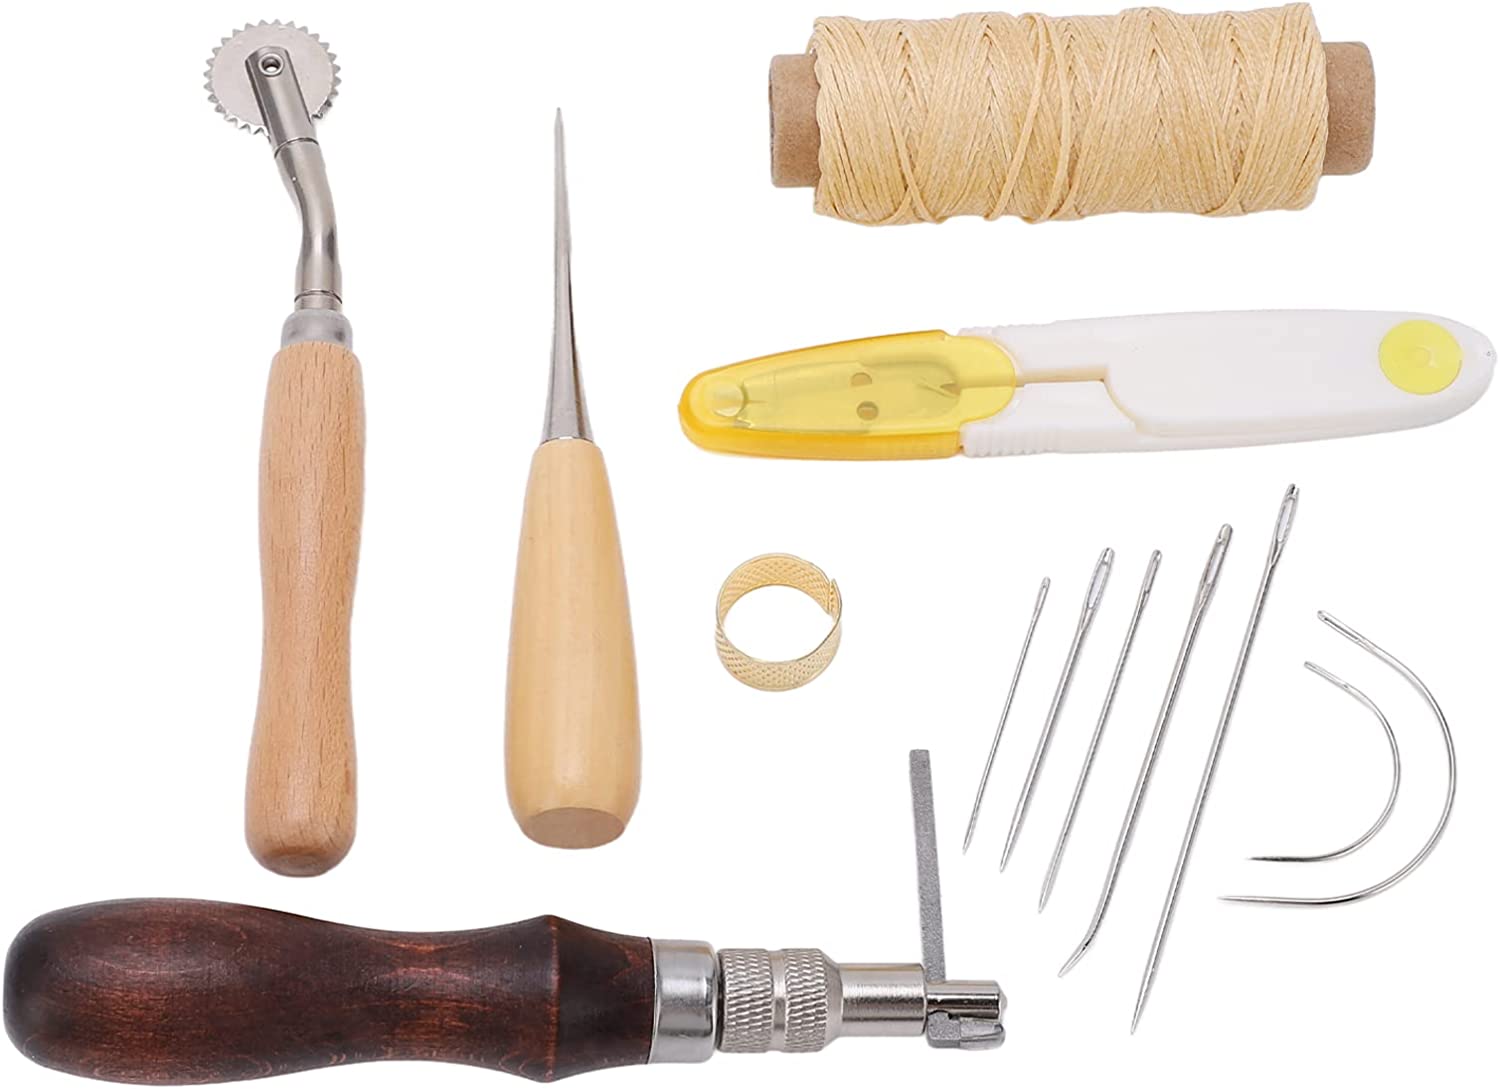 Leather Sewing Kit, Leather Working Tools and Supplies, Leather Working Kit  with Large-Eye Stitching Needles, Waxed Thread, Leather Upholstery Repair  Kit, Leather Sewing Tools for DIY Leather Craft, 